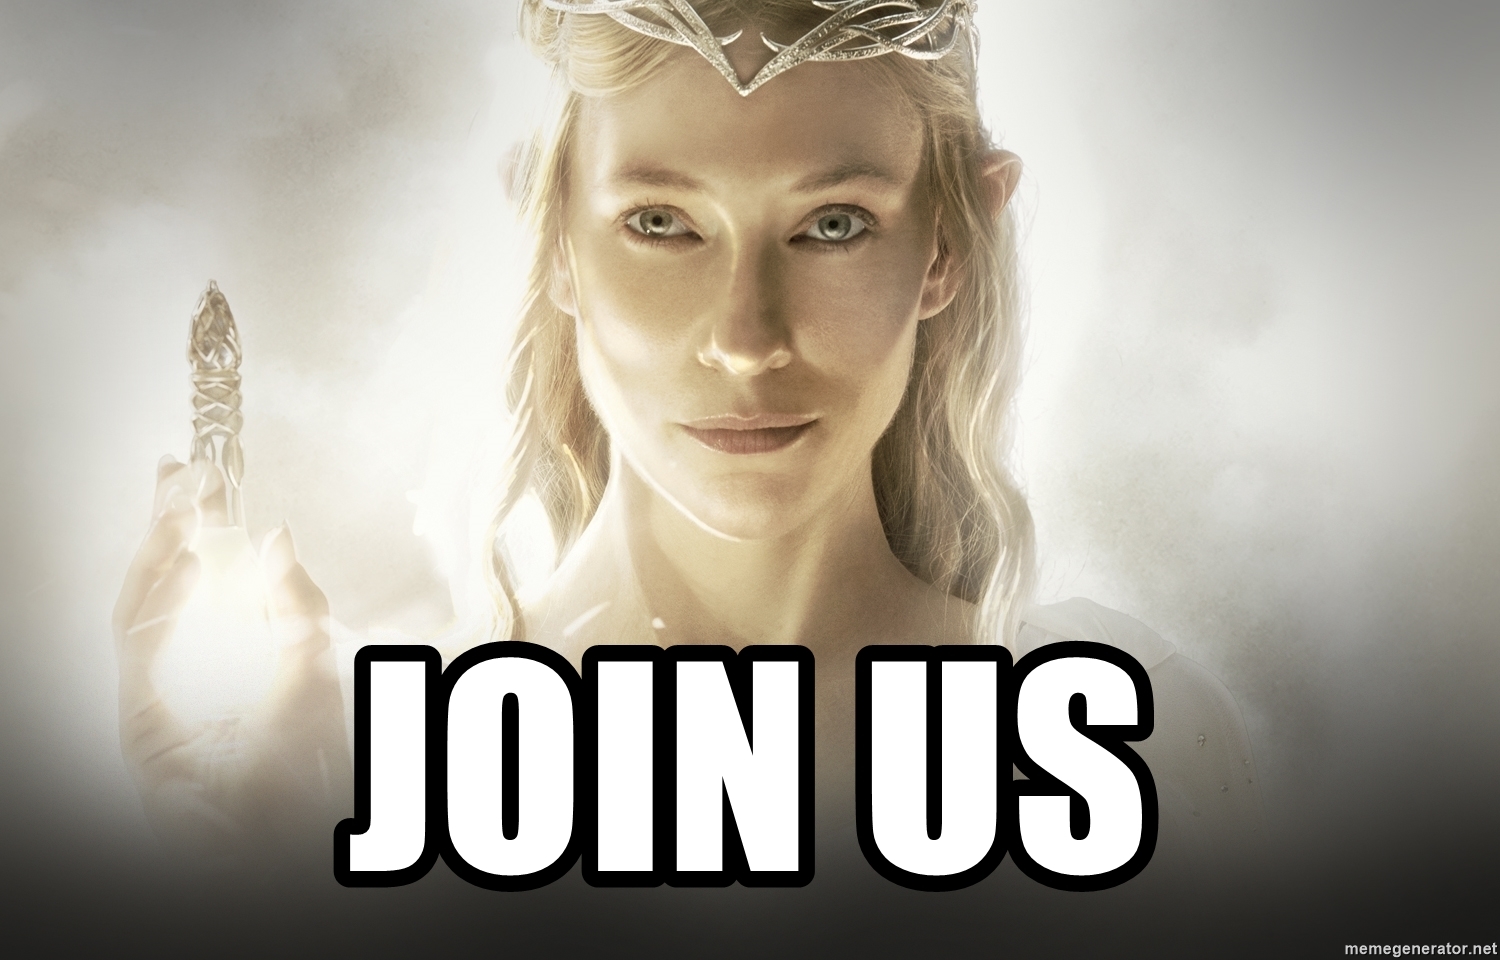 The Elf Queen Galadriel, portrayed by Cate Blanchett, glowing benevolently above the slogan "JOIN US"